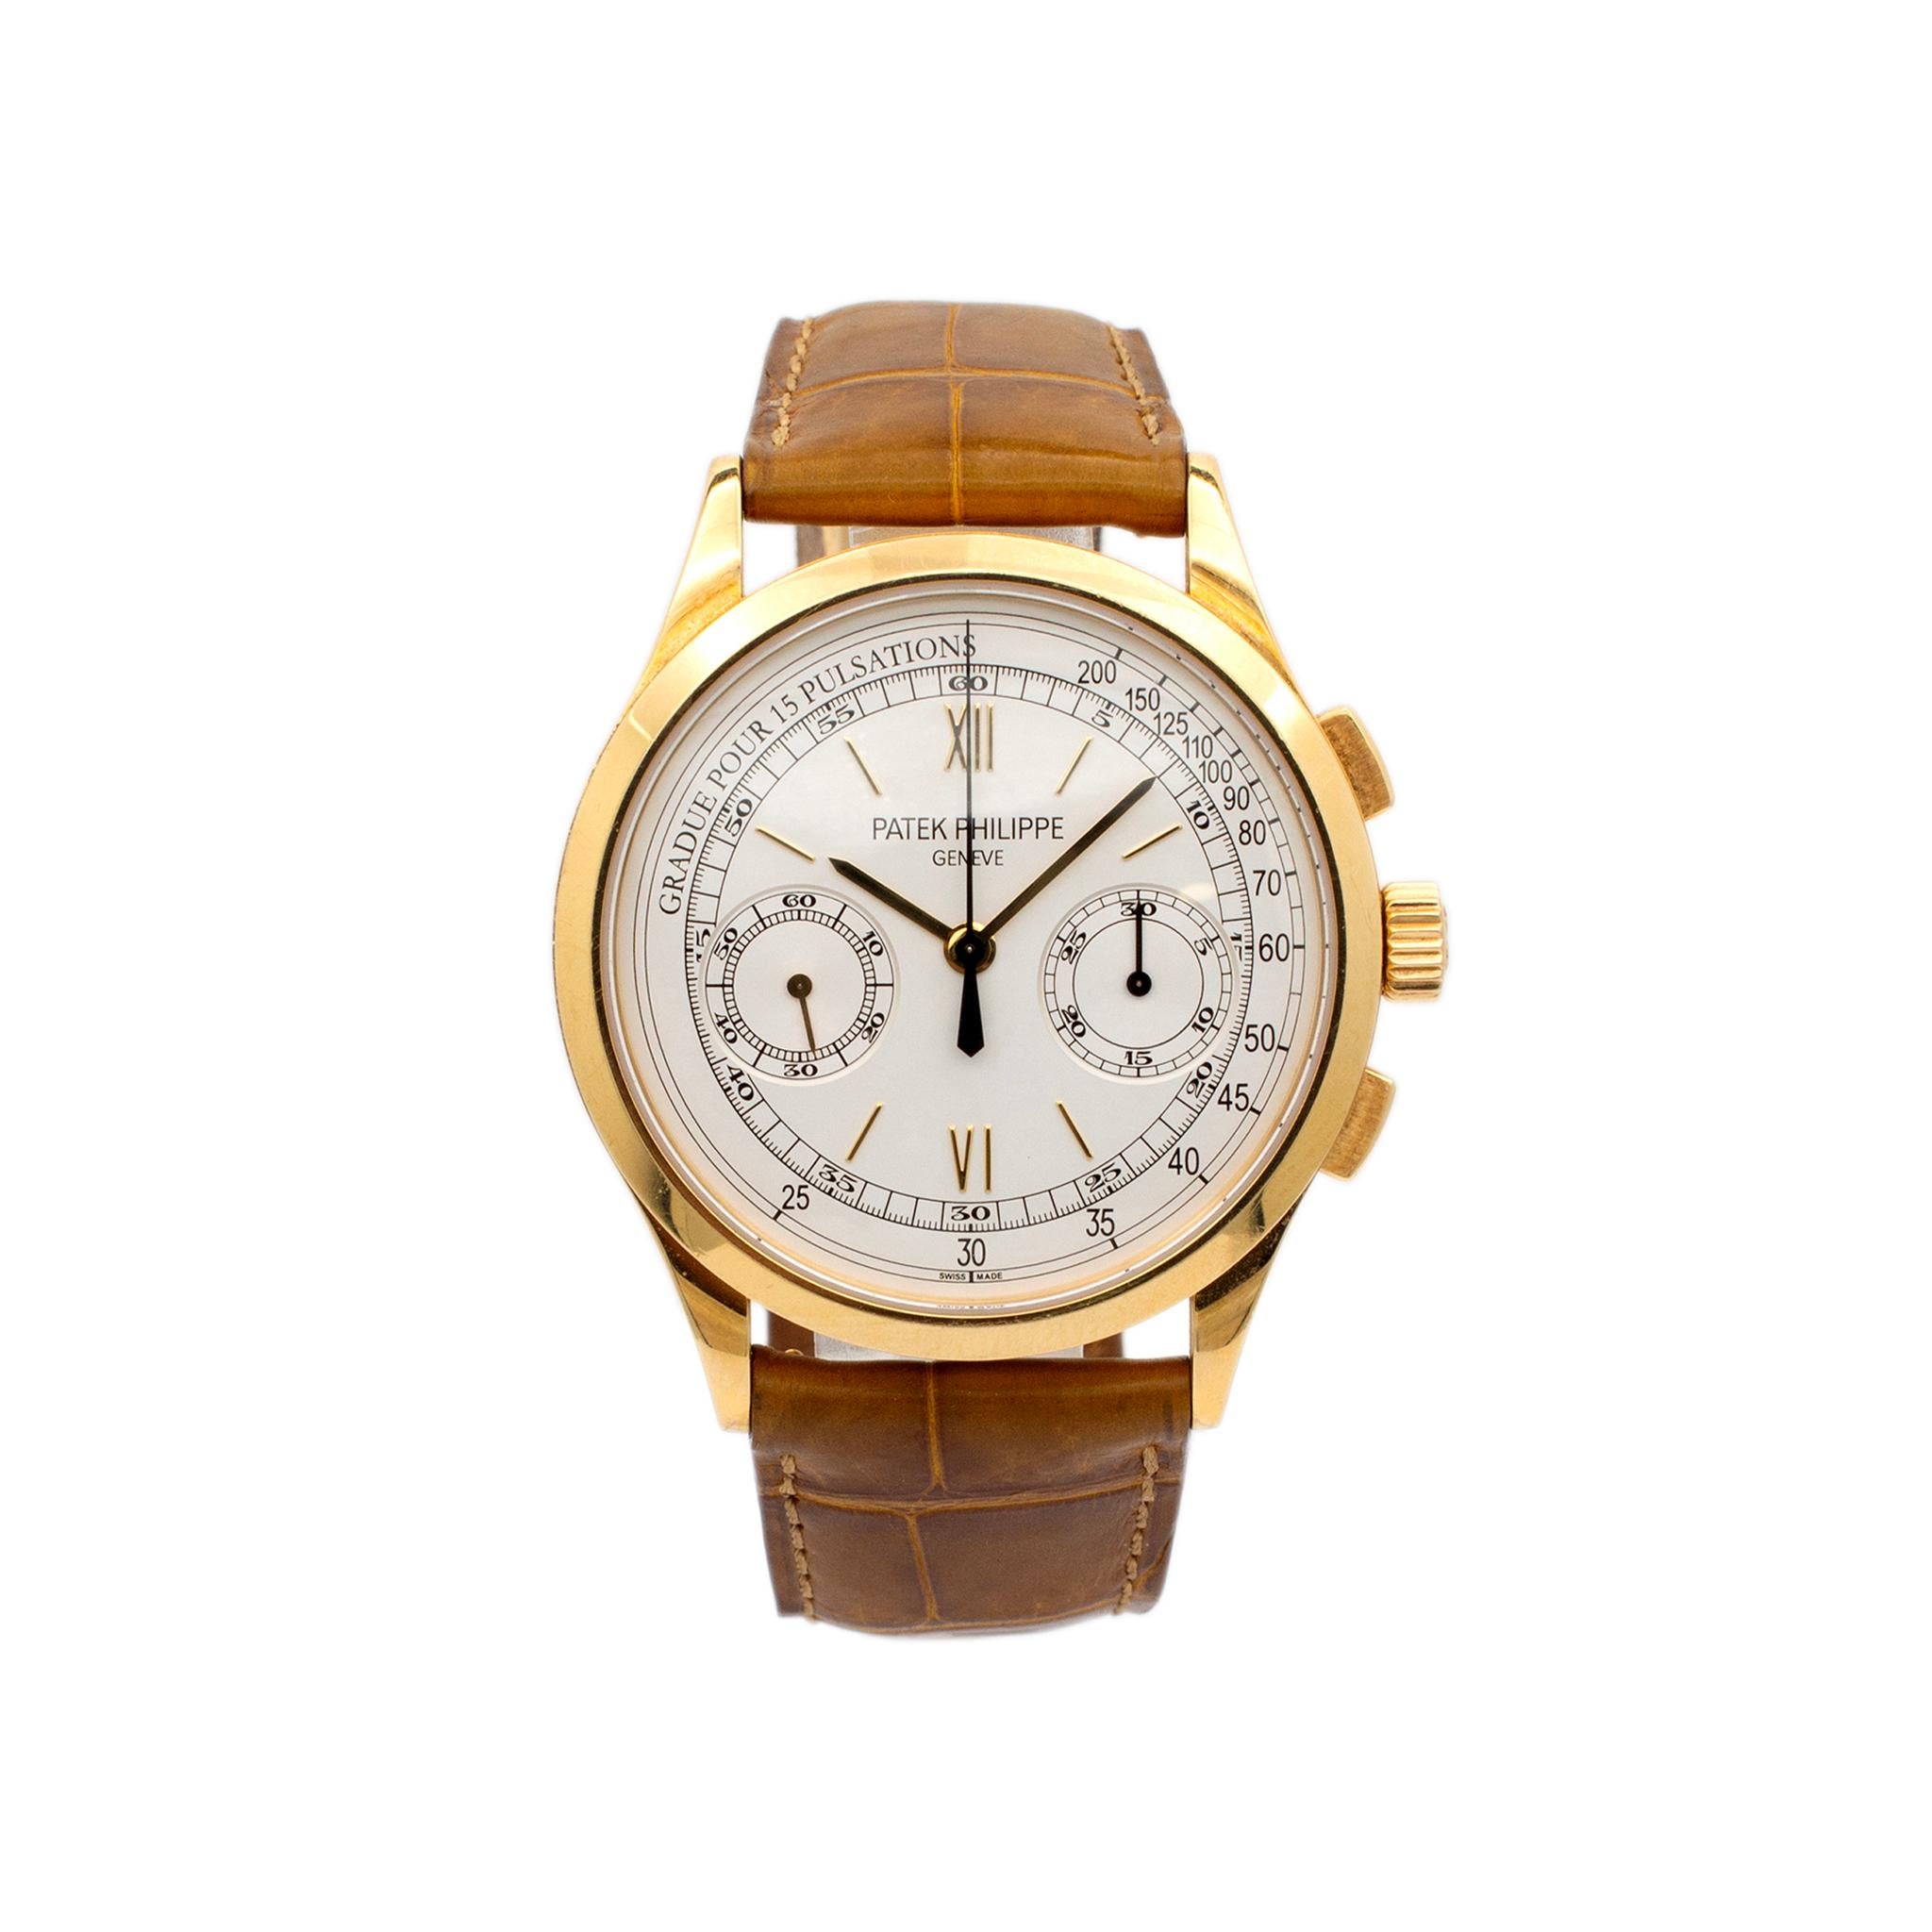 Brand: Patek Philippe

Gender: Men's

Metal Type: 18K Yellow Gold

Diameter: 39.00 mm

Weight: 99.60 grams

Gent's 18K yellow gold, PATEK PHILIPPE Swiss made watch with original box and papers.  Engraved with 